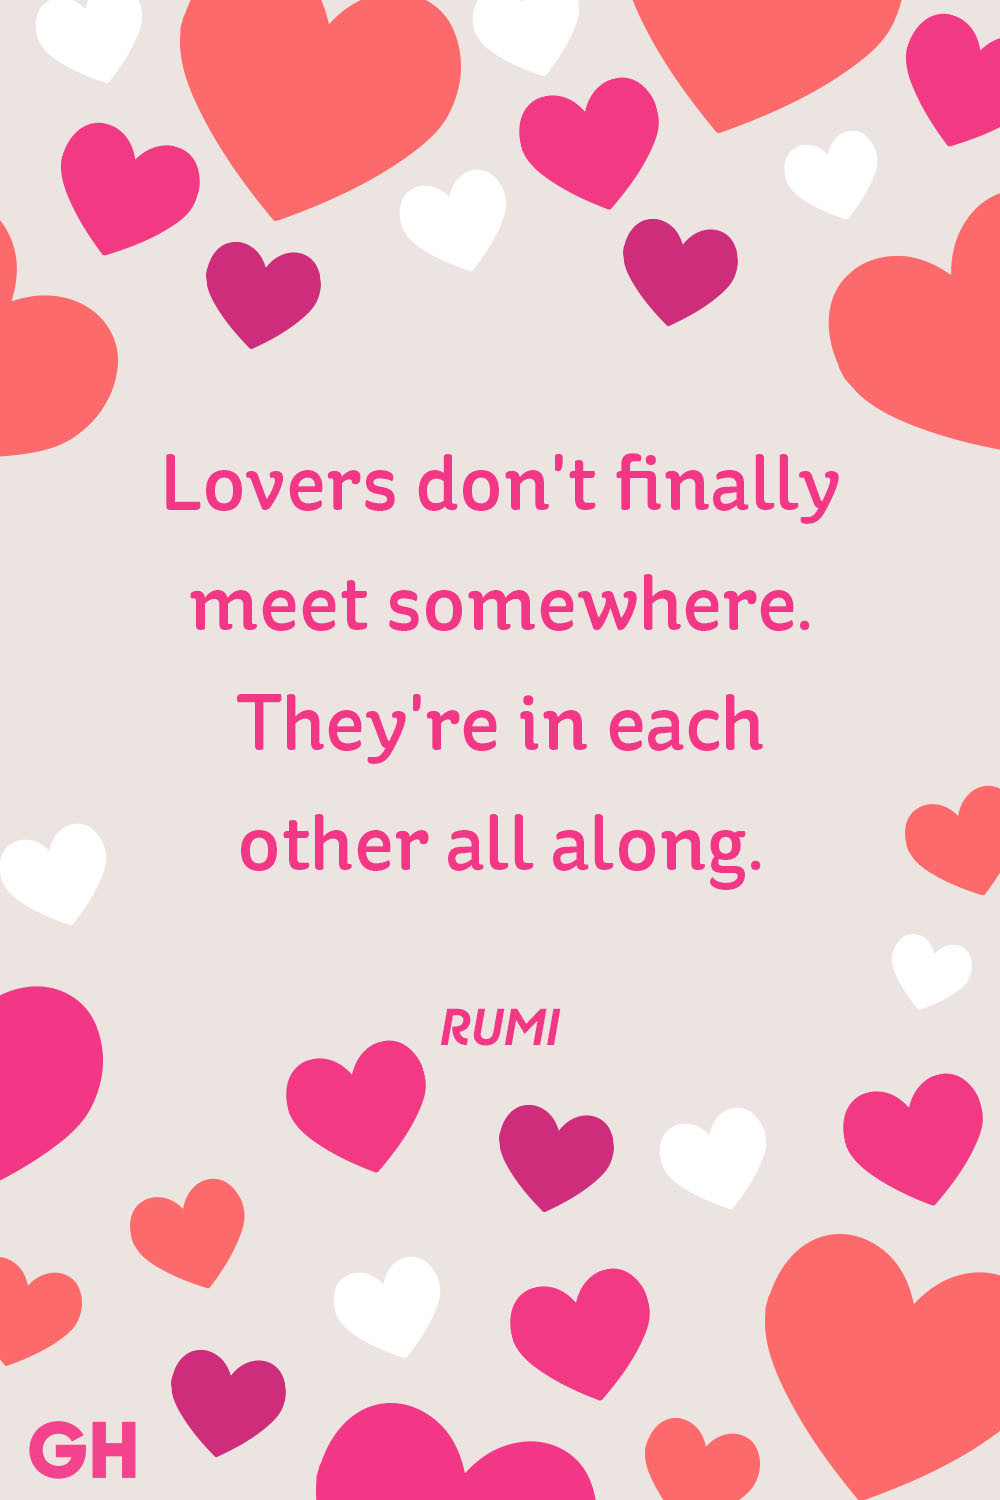 Quotes Valentines Day
 30 Cute Valentine s Day Quotes Best Romantic Quotes